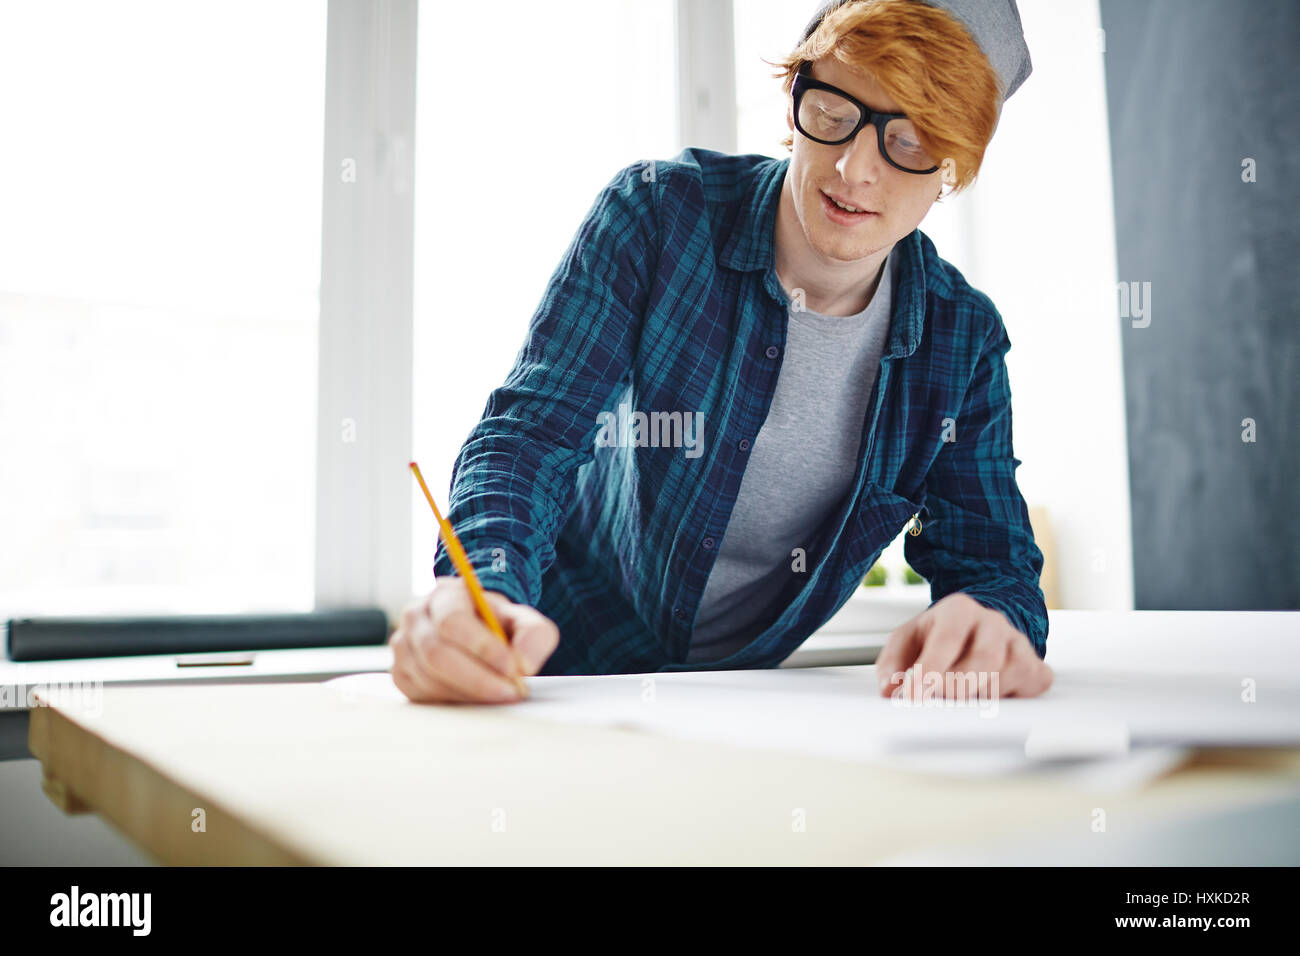 Young Creative Designer Drawing Stock Photo